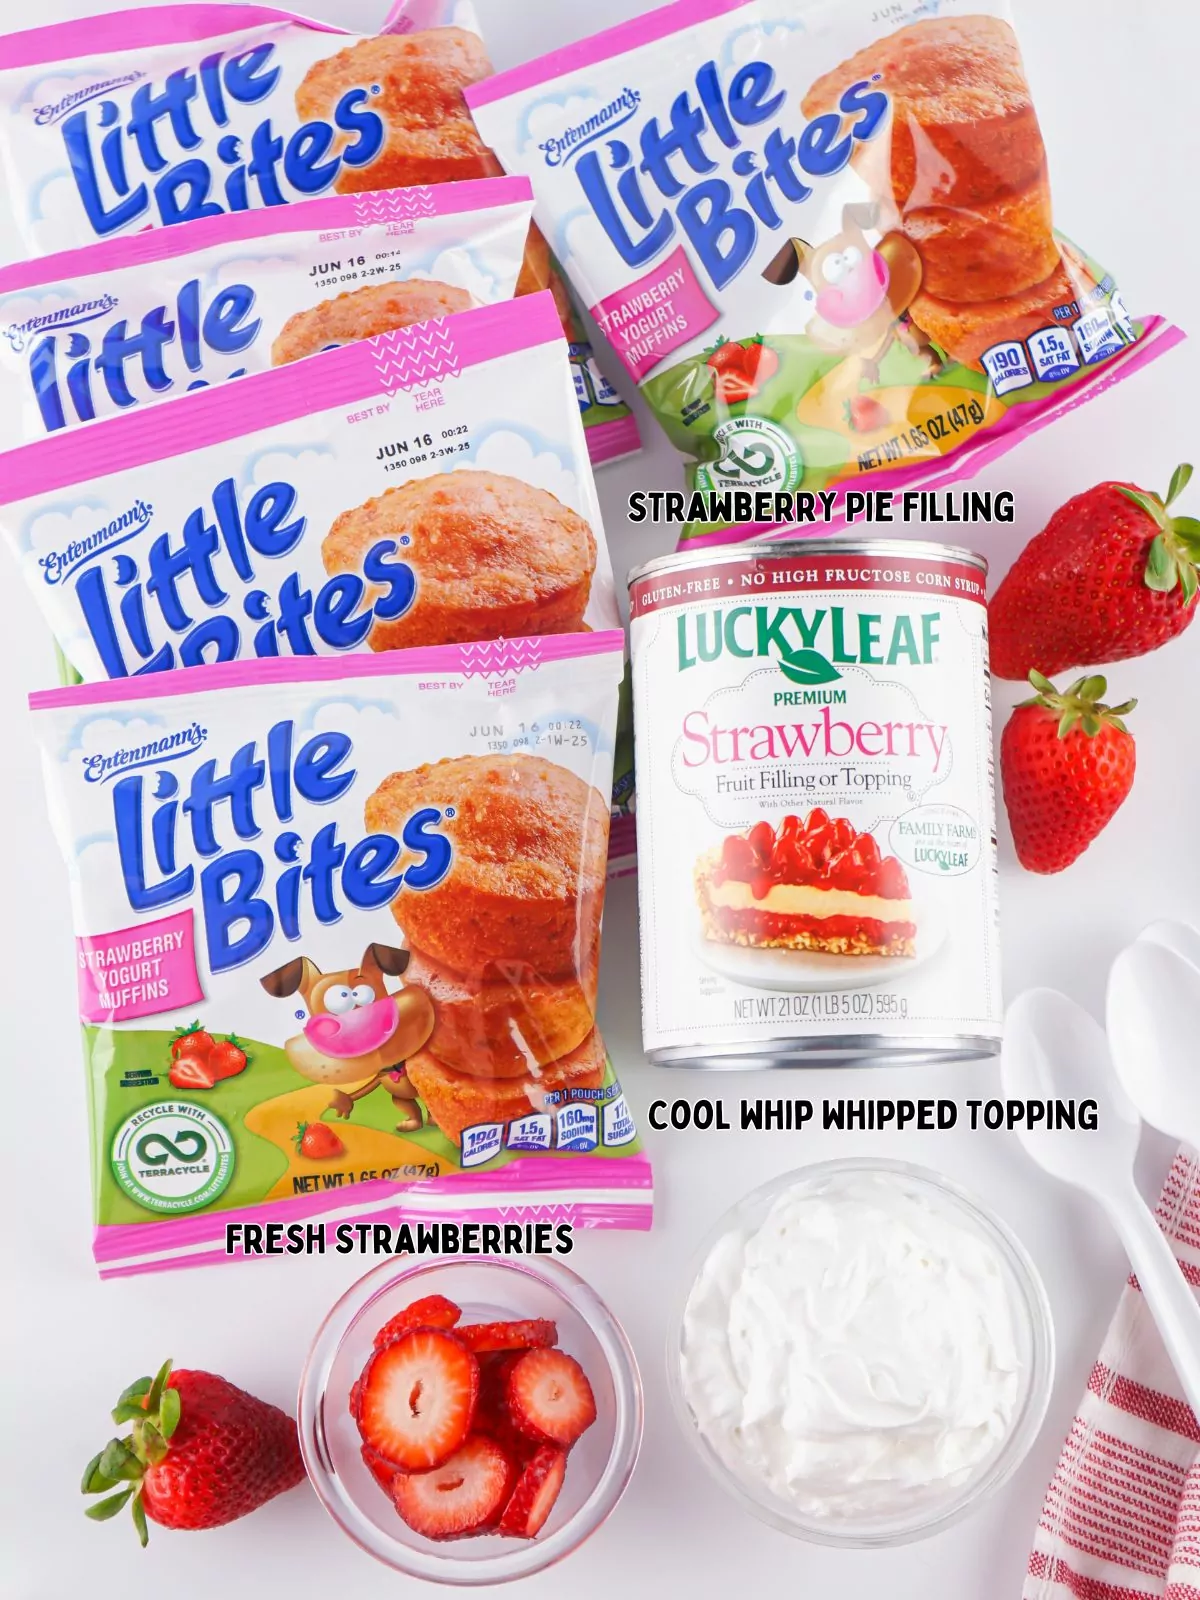 Ingredients of strawberry muffins, pie filling, Cool whip and fresh fruit.